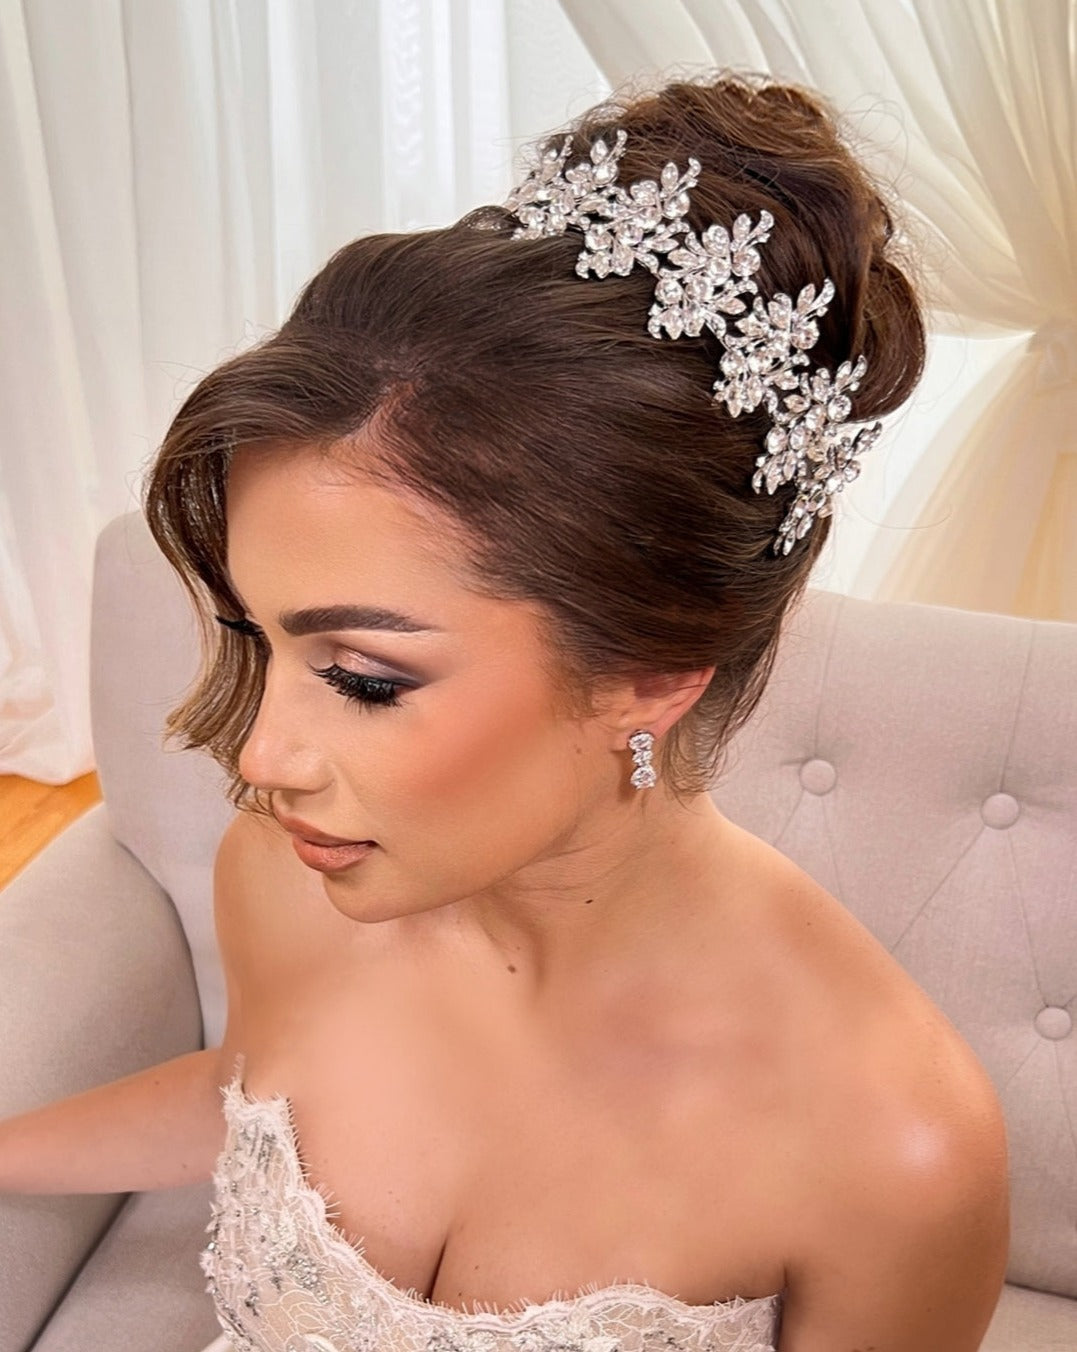 side view of female model wearing pointed bridal headband with crystal floral details